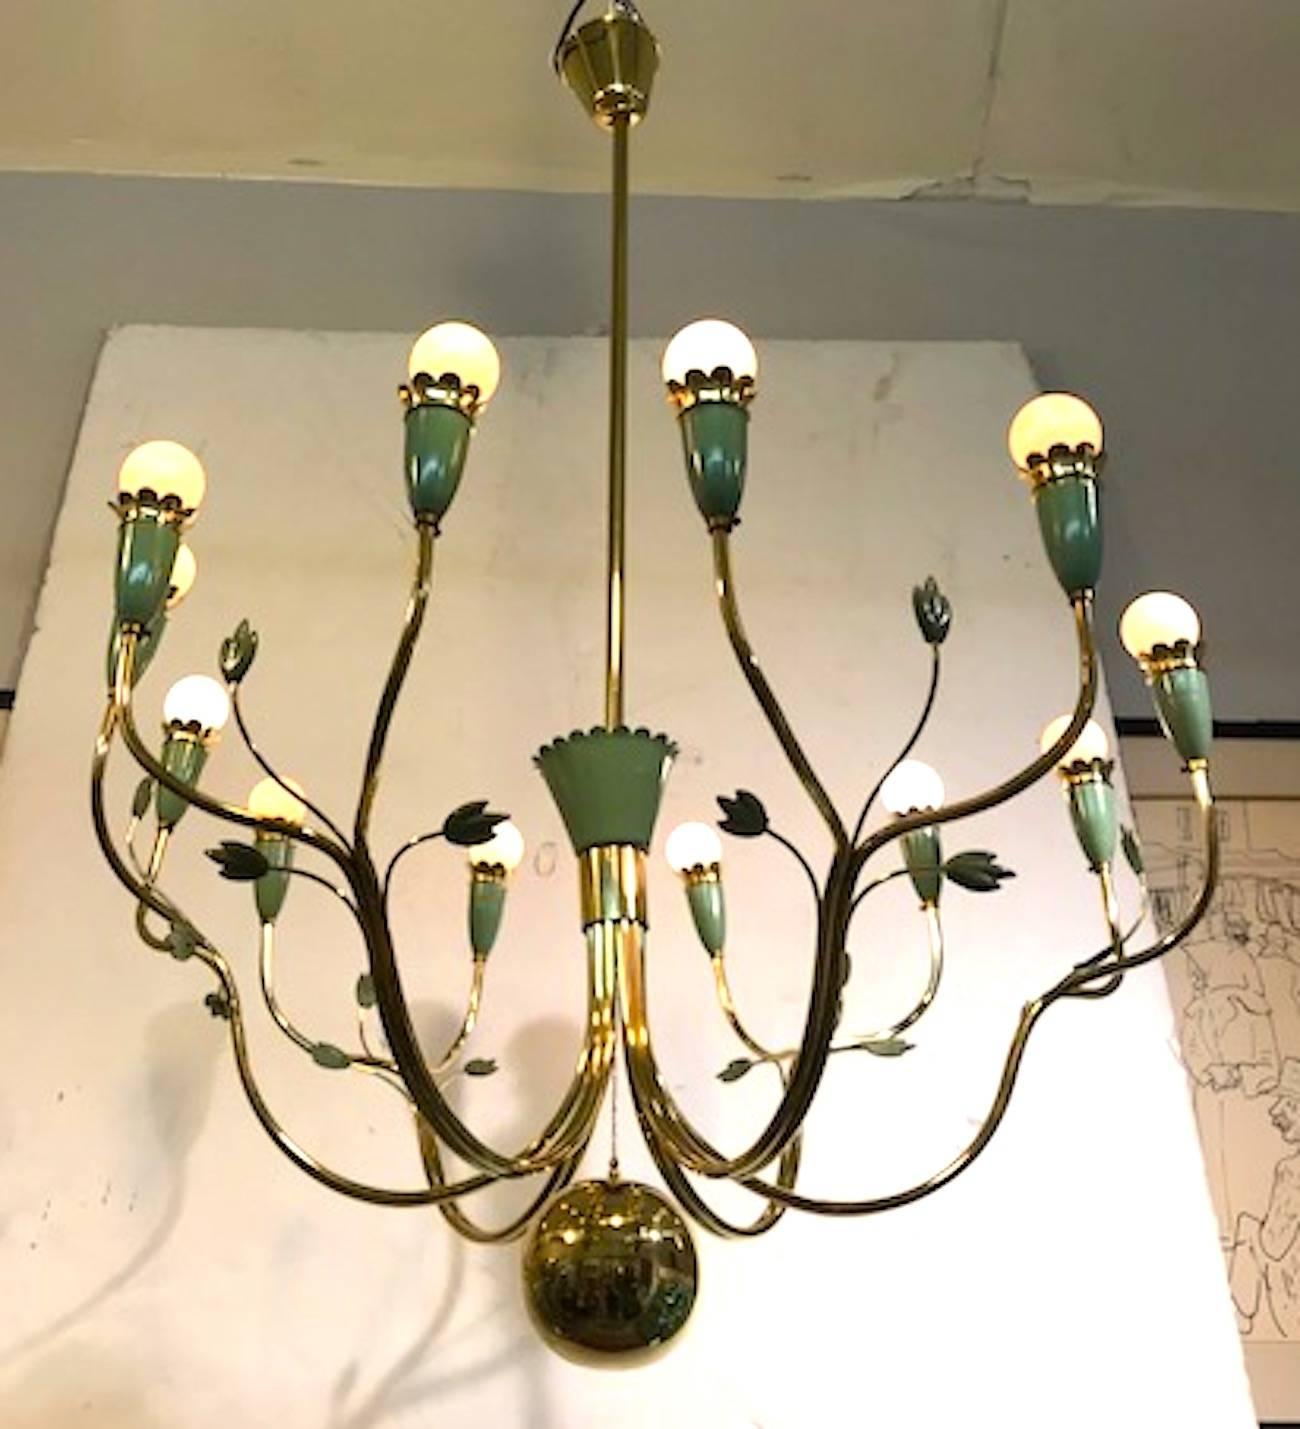 A wonderful and rare large chandelier designed by Angel Lelli and produced by Arredoluce, circa 1950. Lelli founded the lighting company Arredoluce in 1947 in the city of Monza in Lombardy. The body of the chandelier is brass with green enamel leaf